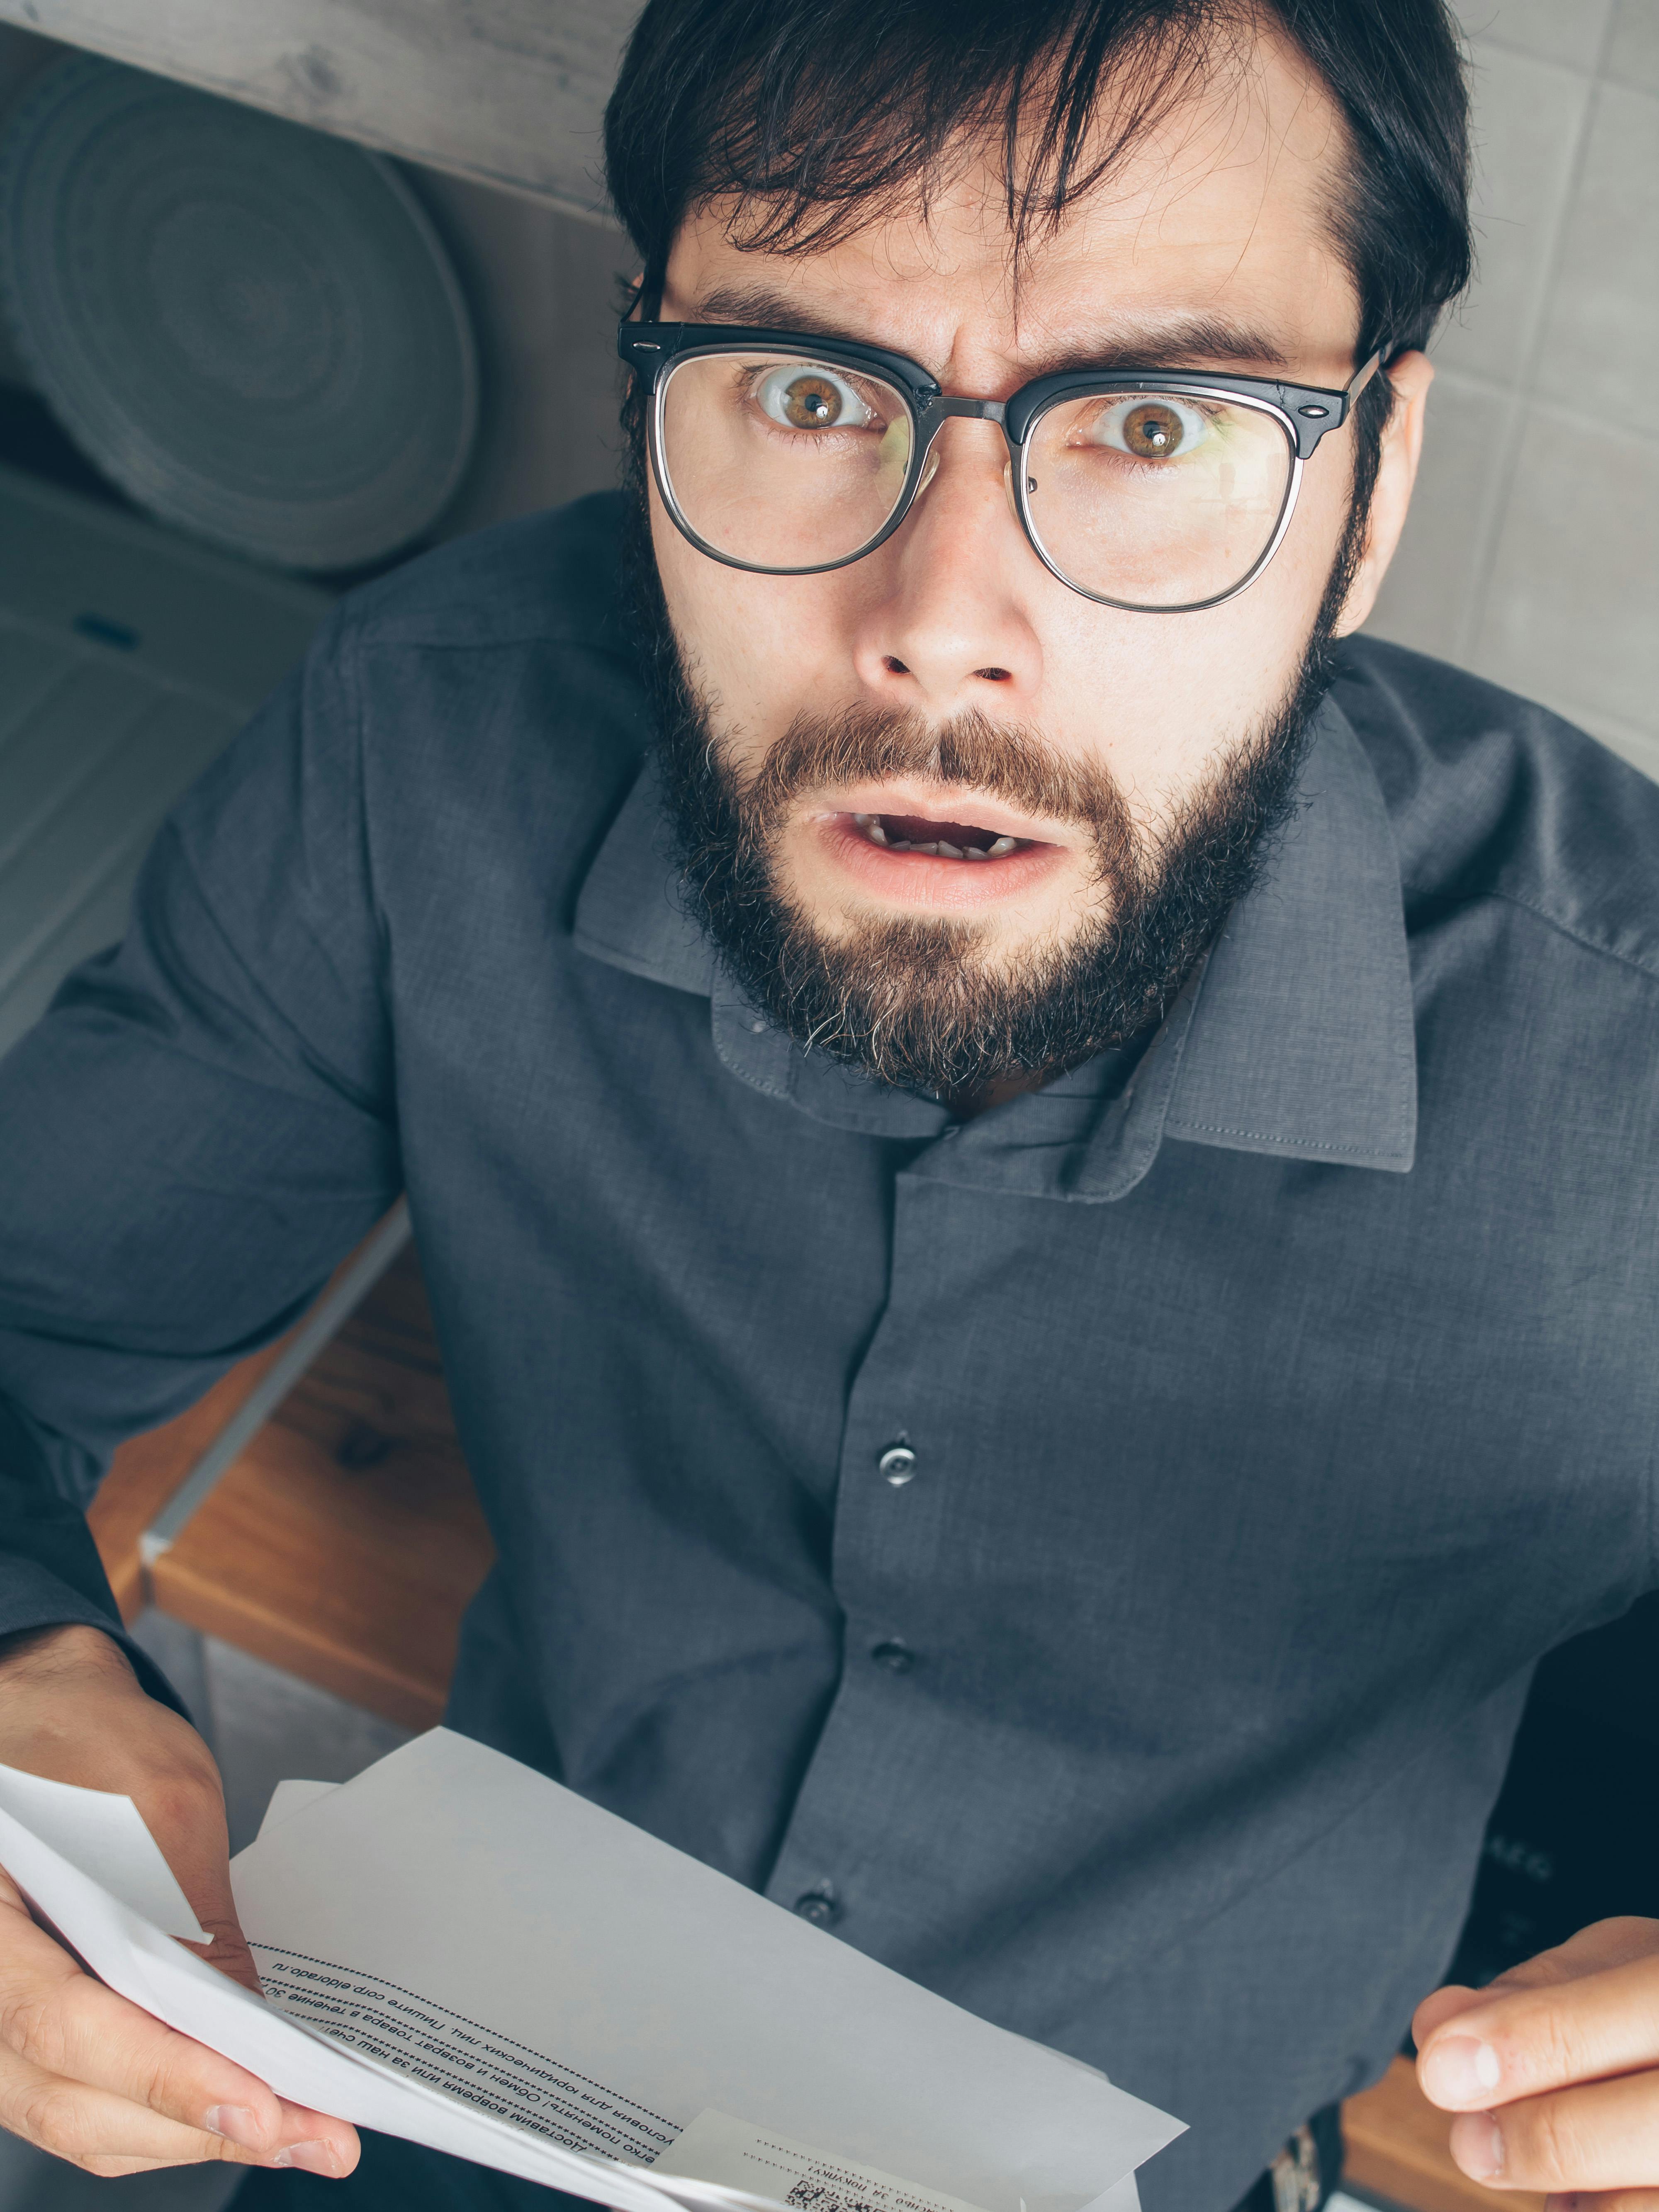 A shocked man holding a piece of paper | Source: Pexels